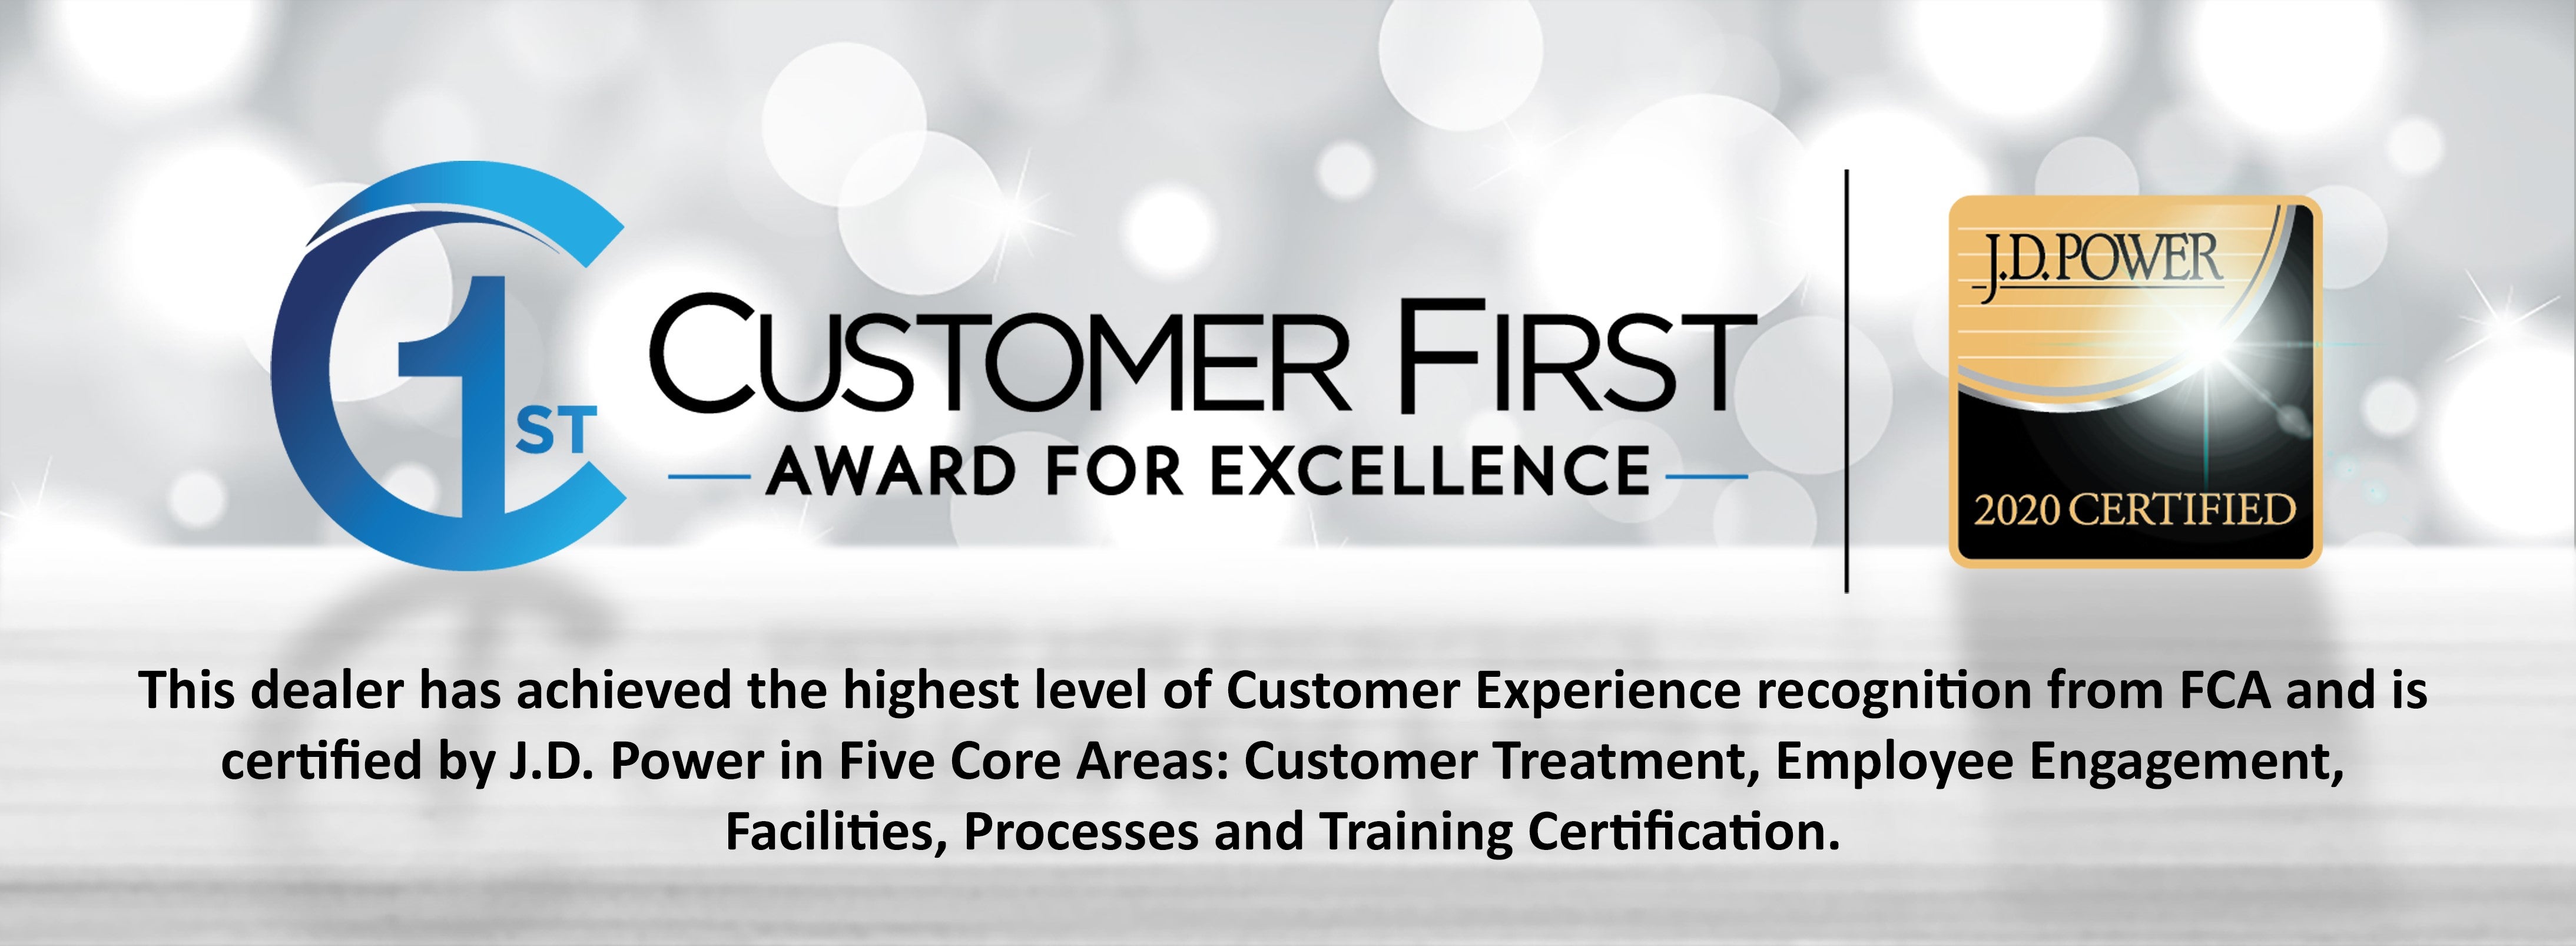 Customer First Award for Excellence for 2019 at Lake Chrysler Dodge Jeep Ram in Lewistown, PA